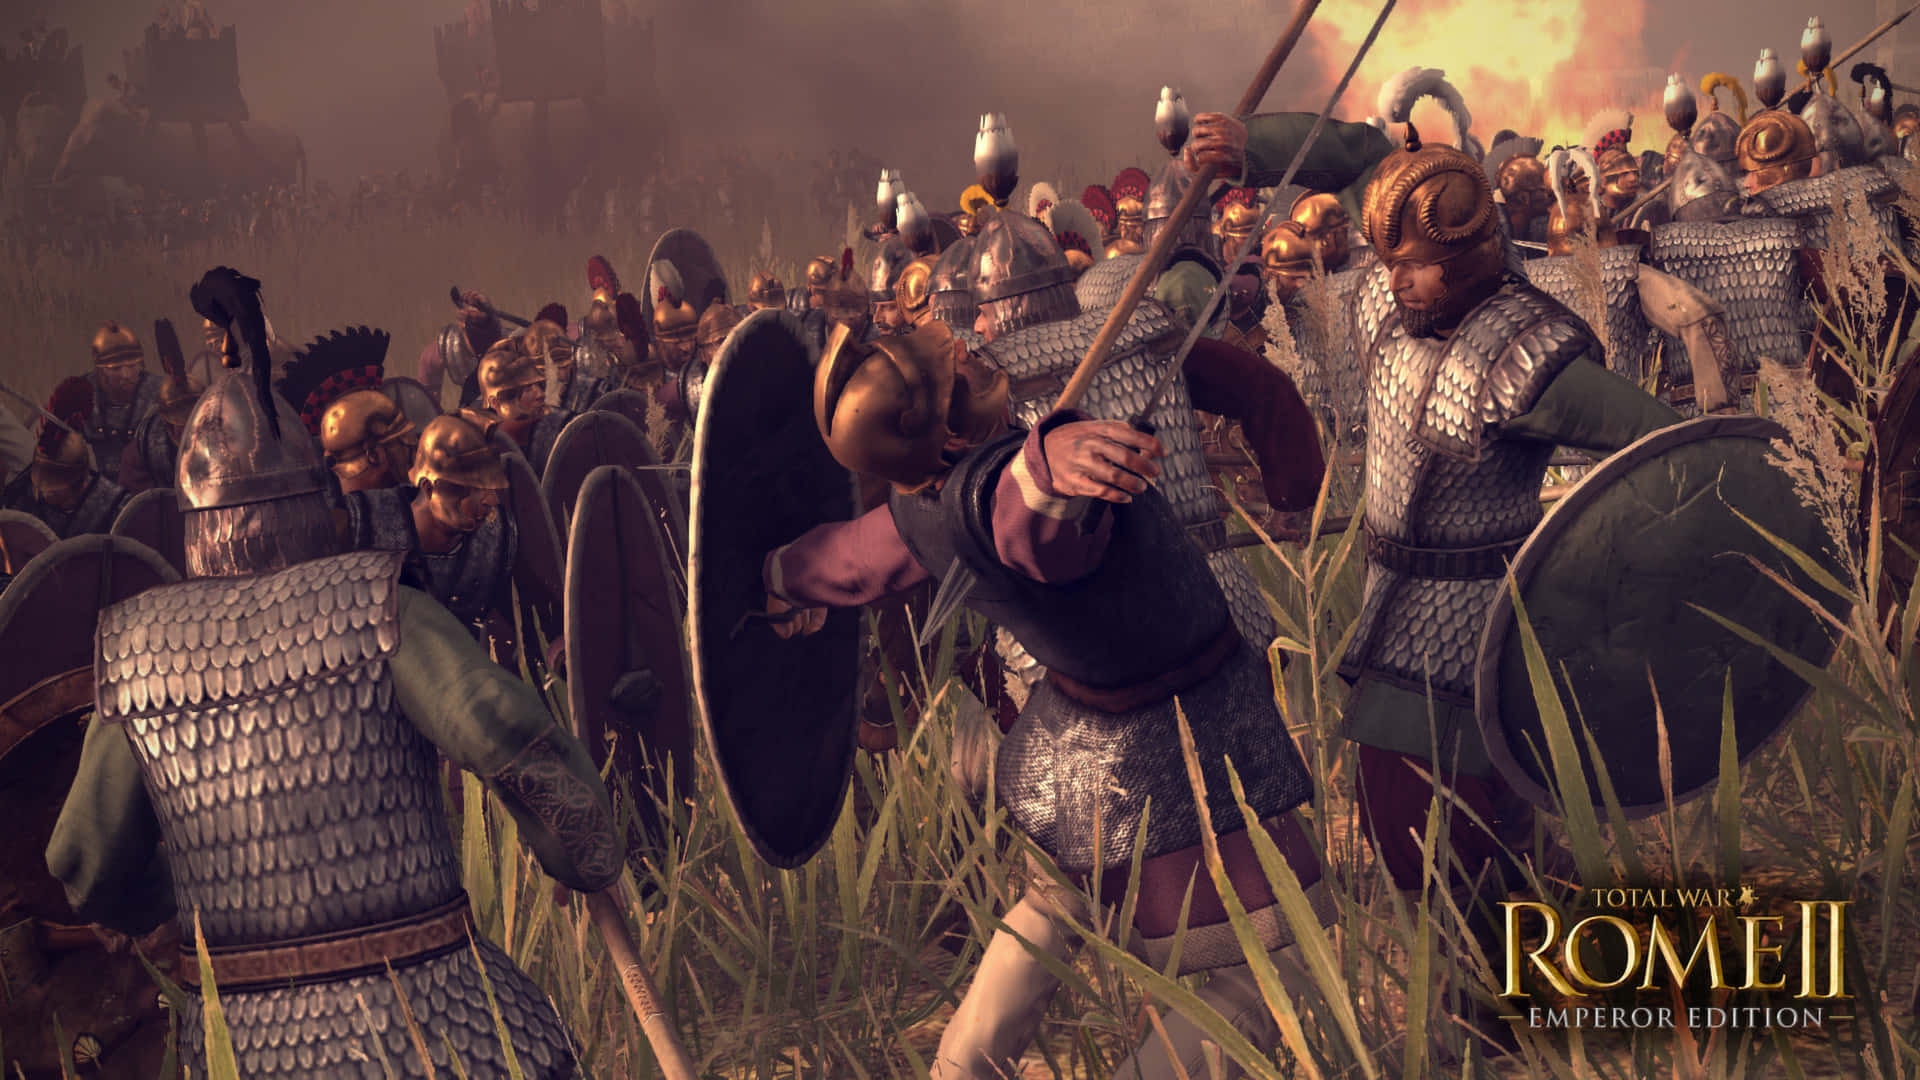 Best Total War Rome 2 Background Gray Armors 1920 x 1080 Background